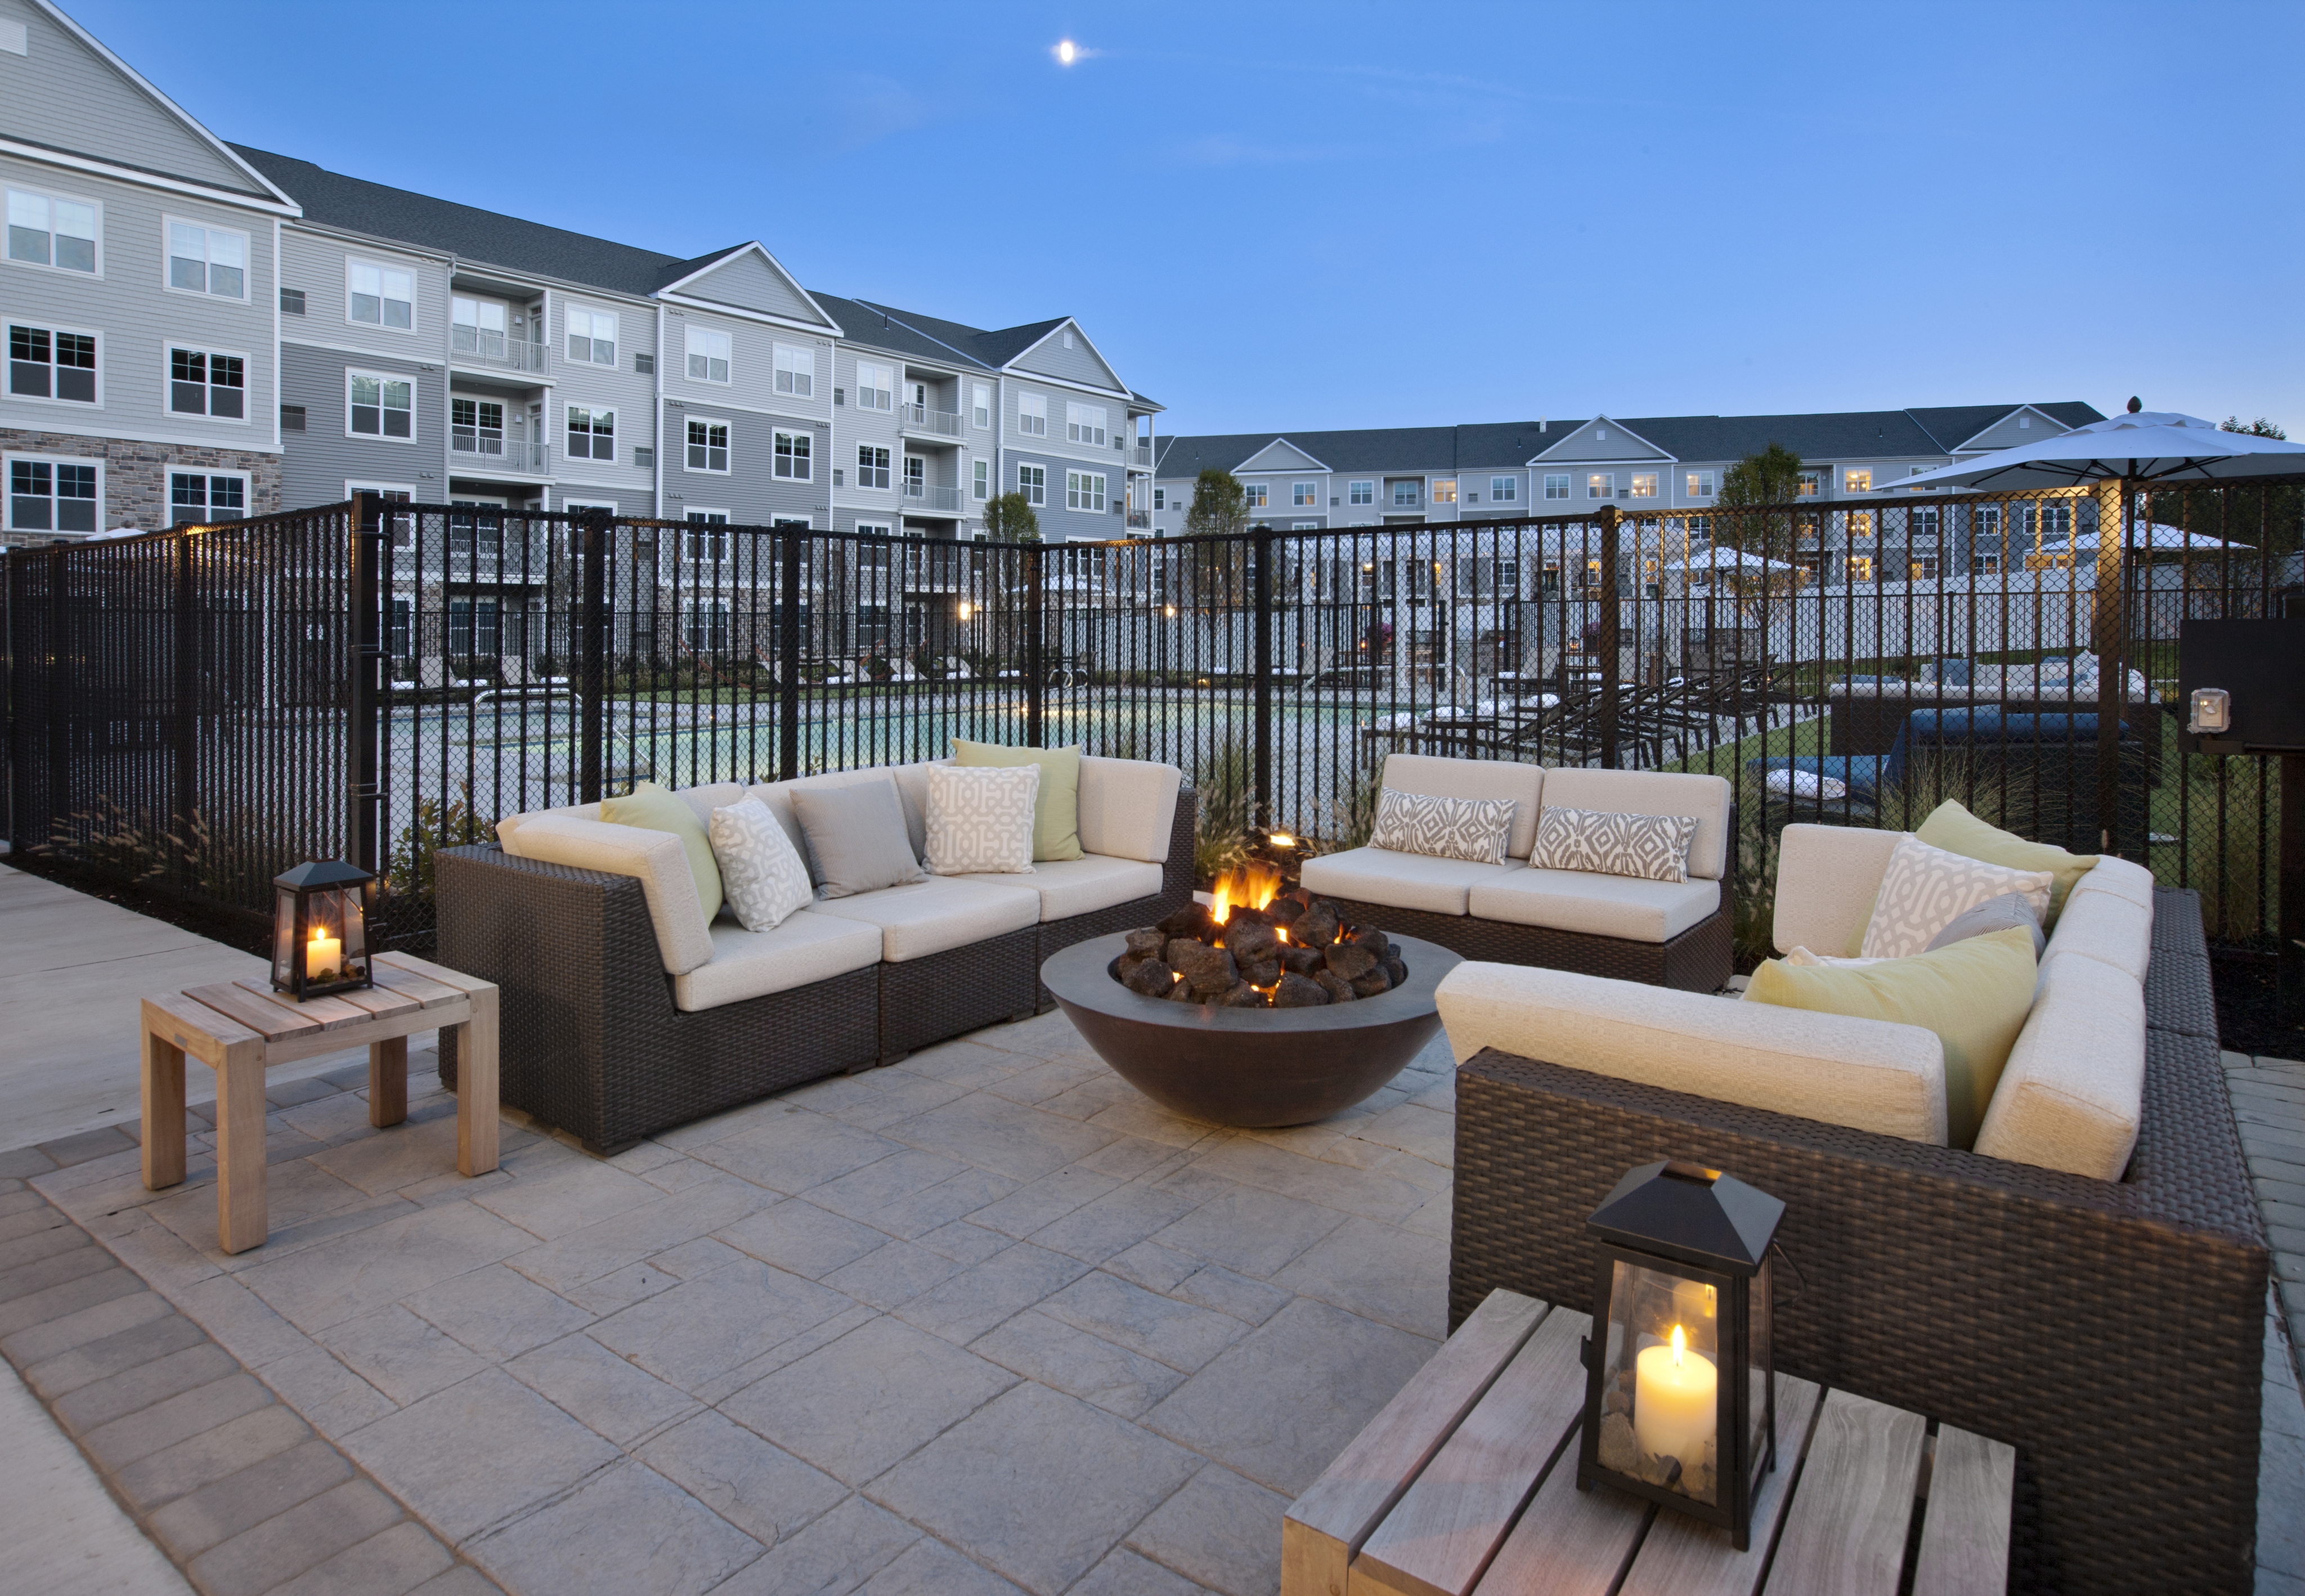 View of Pool Area, Showing Outdoor Couches, Firepit, Fenced-In Pool, and Apartment Buildings in Background at Parc Westborough Apartments